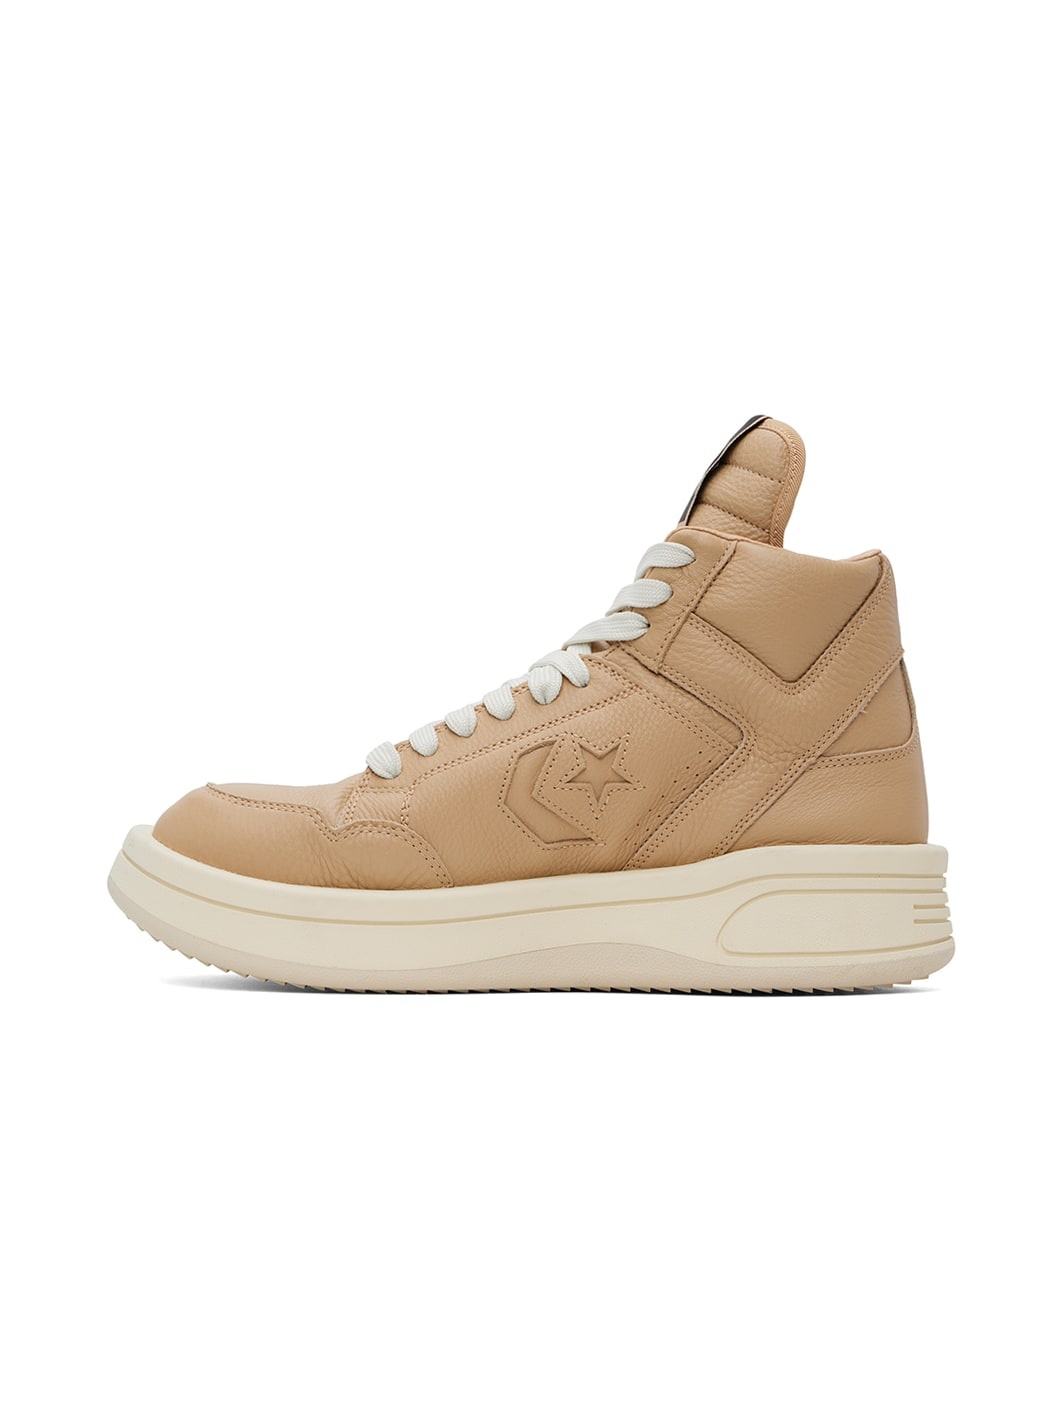 Tan Converse Edition TURBOWPN Mid Sneakers - 3